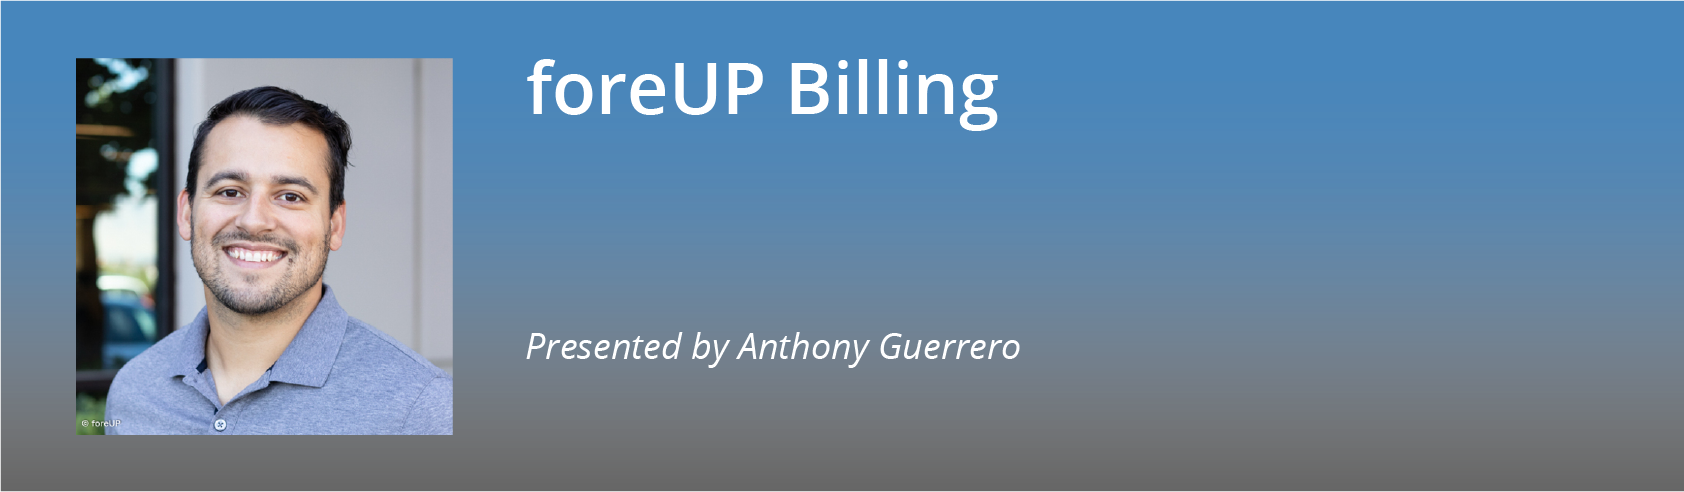 Virtual Summit | foreUP Billing, Payments, & Guest Portal Best Practices - Anthony Guerrero